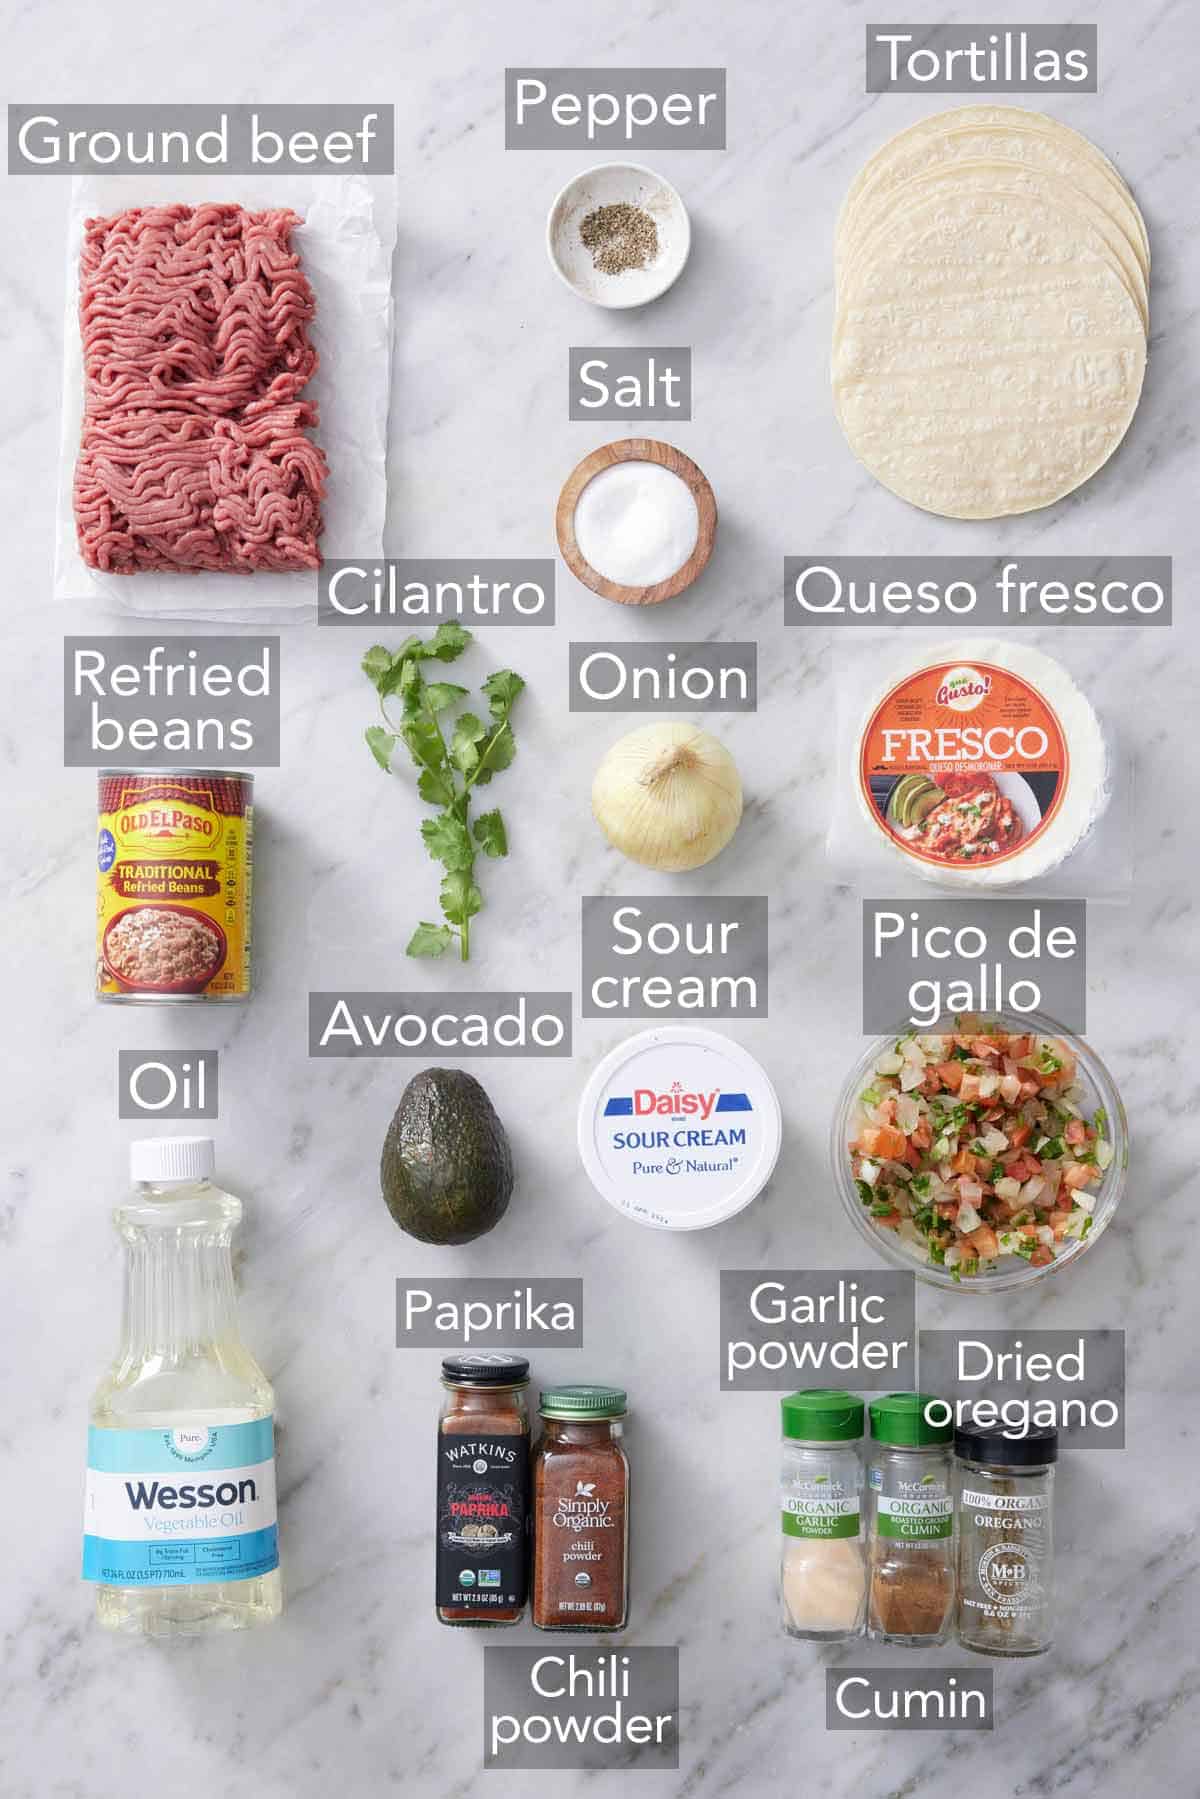 Ingredients needed to make a tostada recipe.